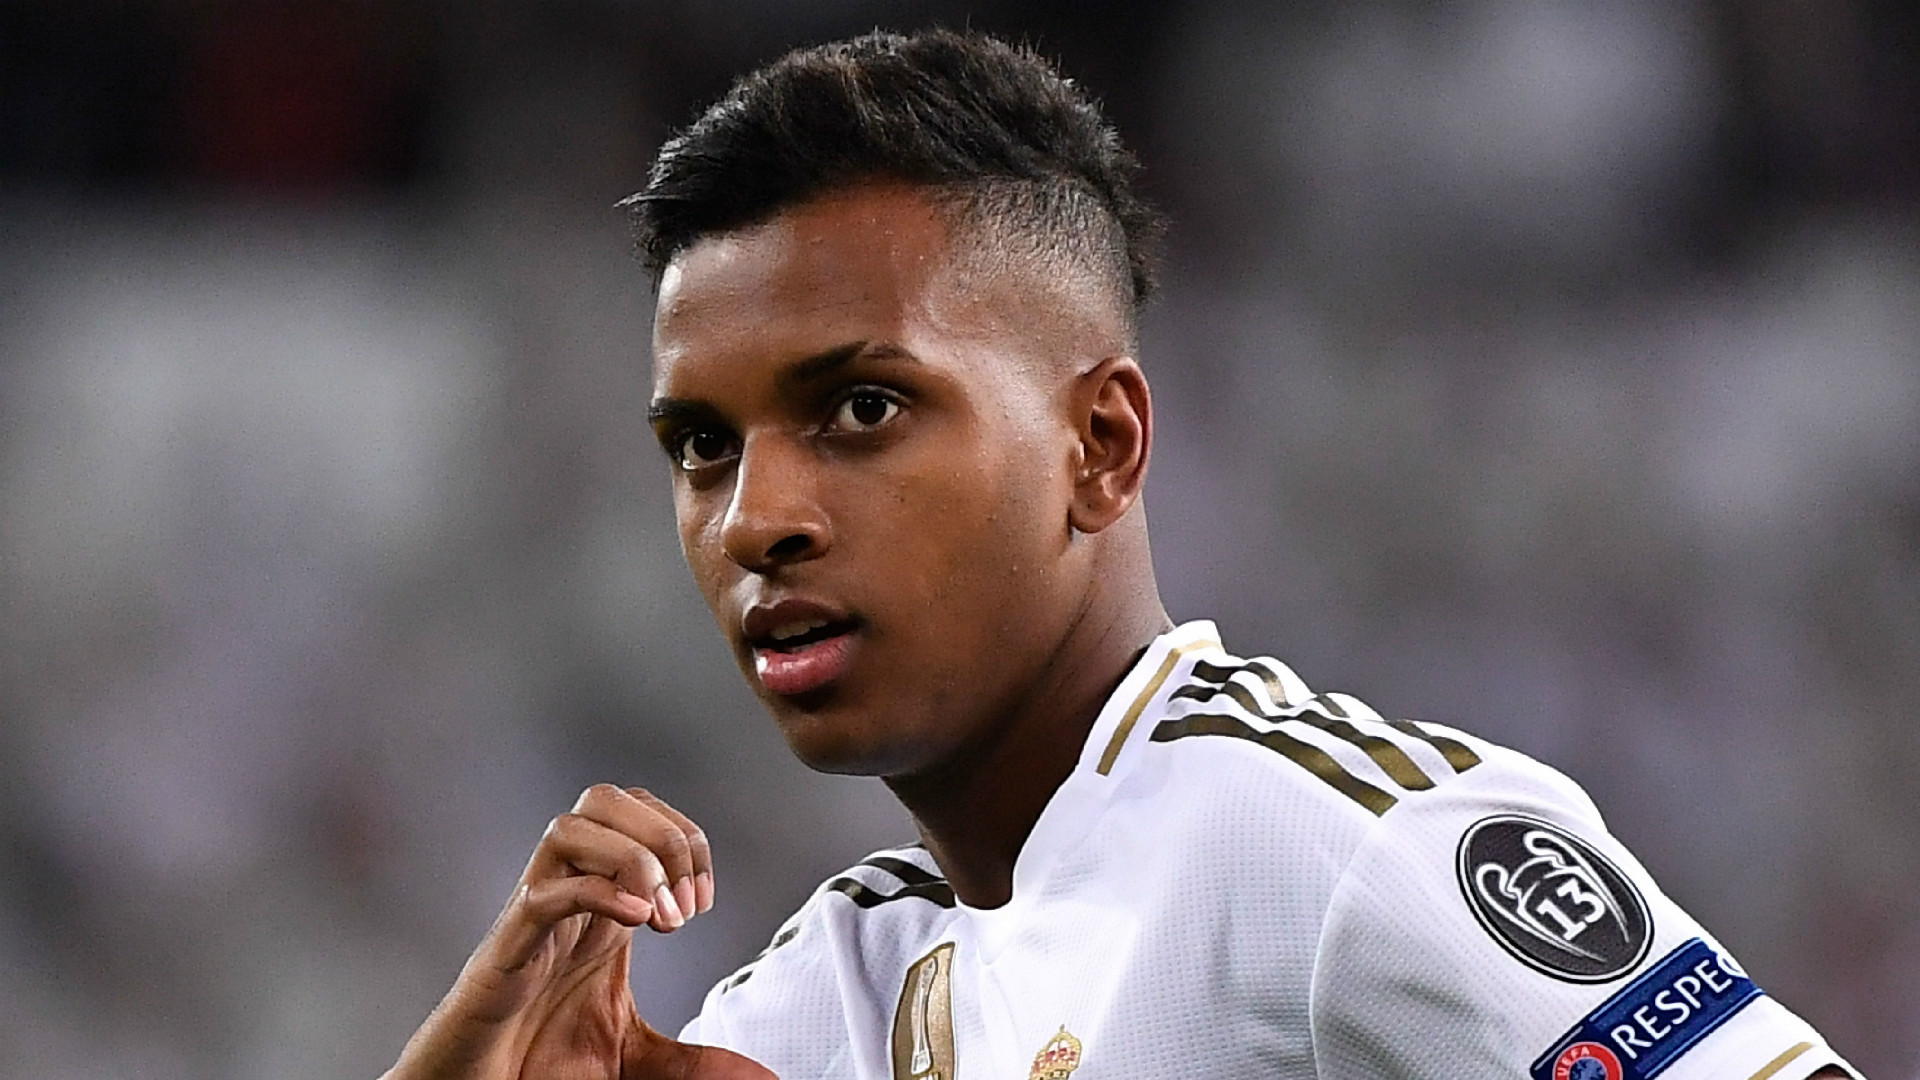  Rodrygo celebrates after scoring a goal during a soccer match between Real Madrid and Galatasaray.